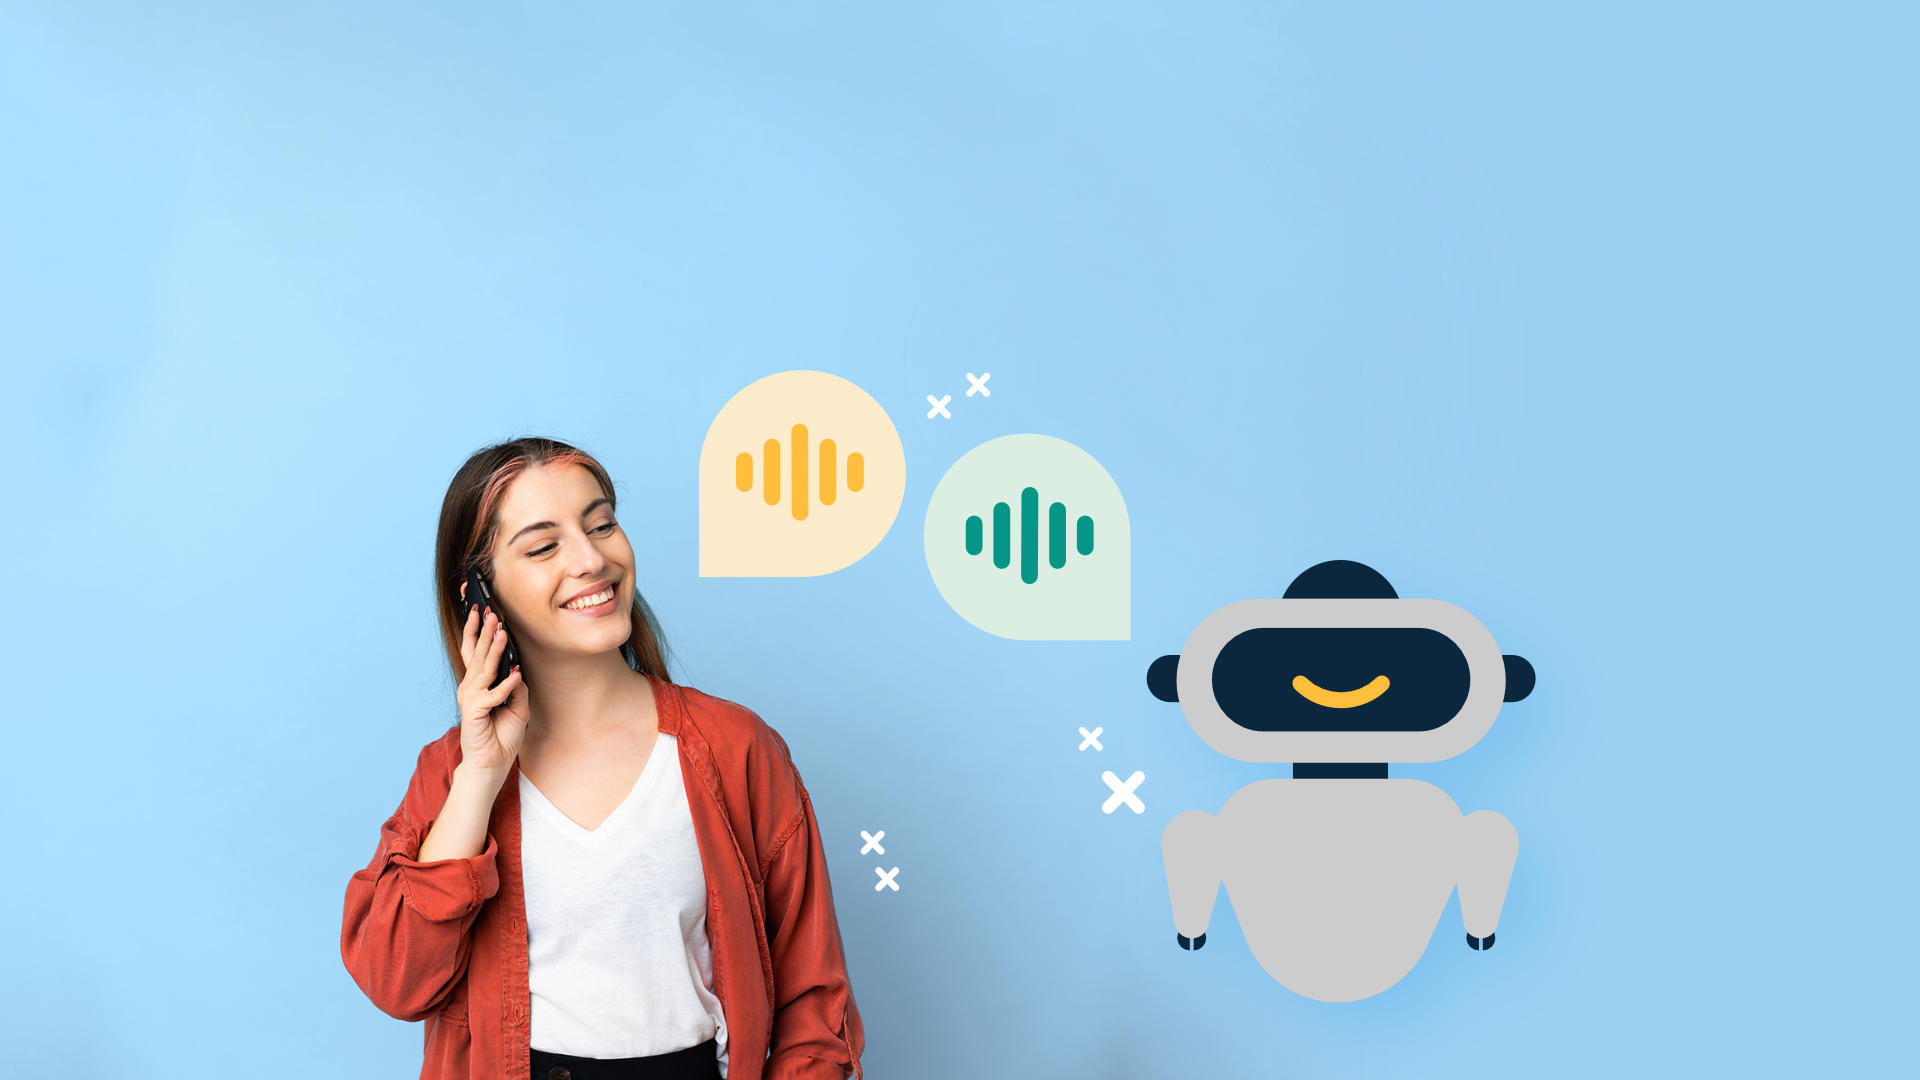 What is Conversational AI, and how does it work?